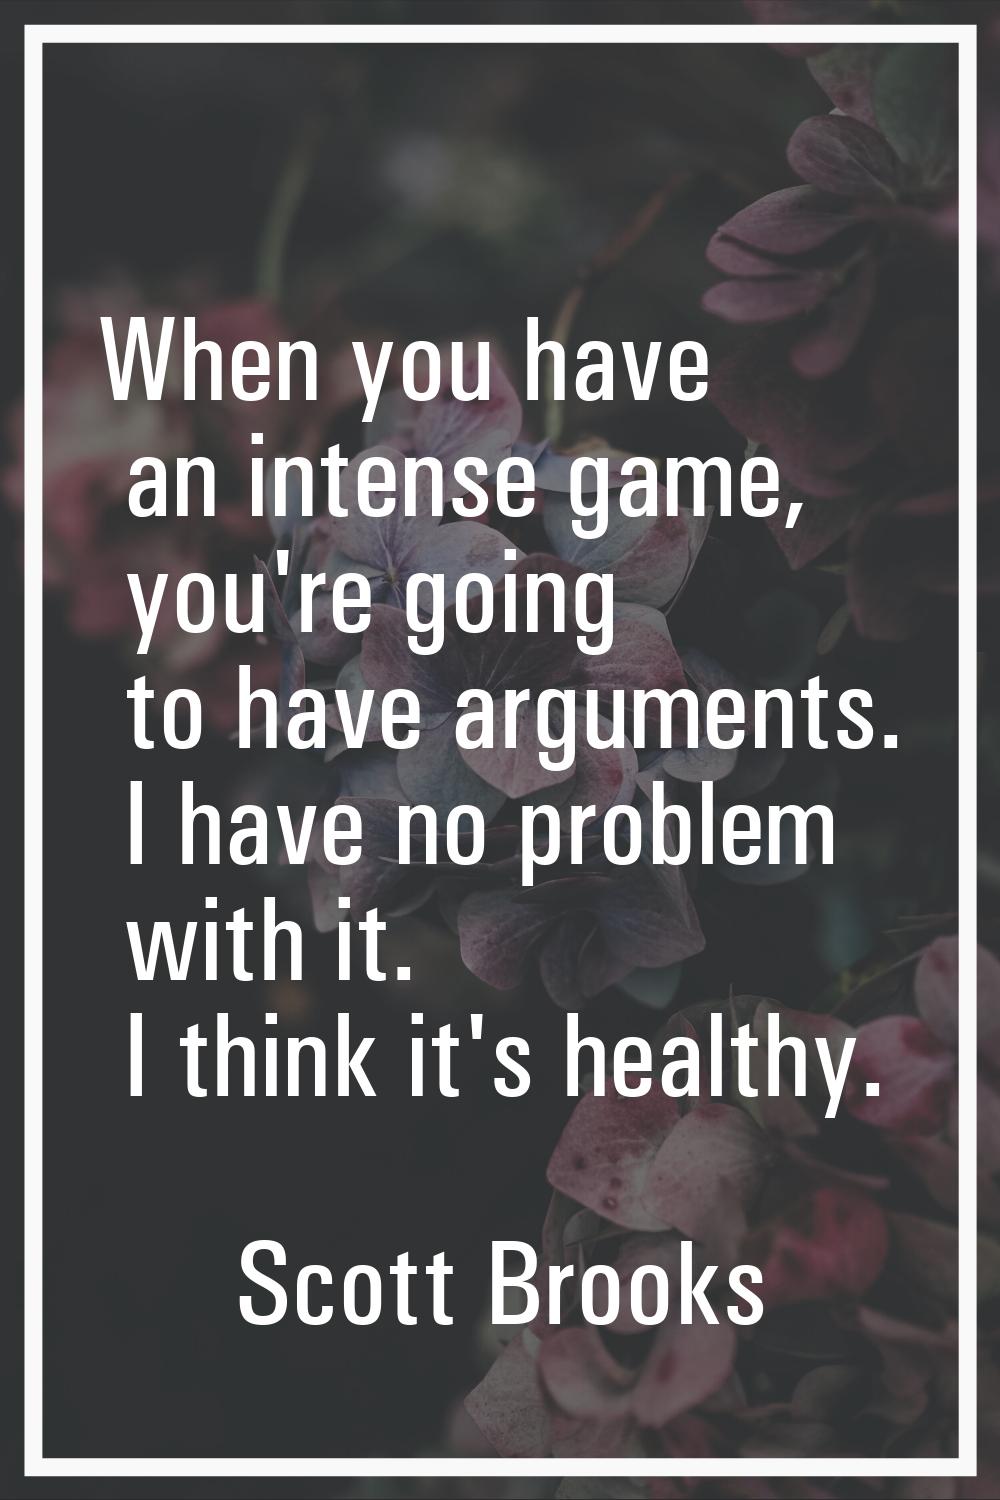 When you have an intense game, you're going to have arguments. I have no problem with it. I think i